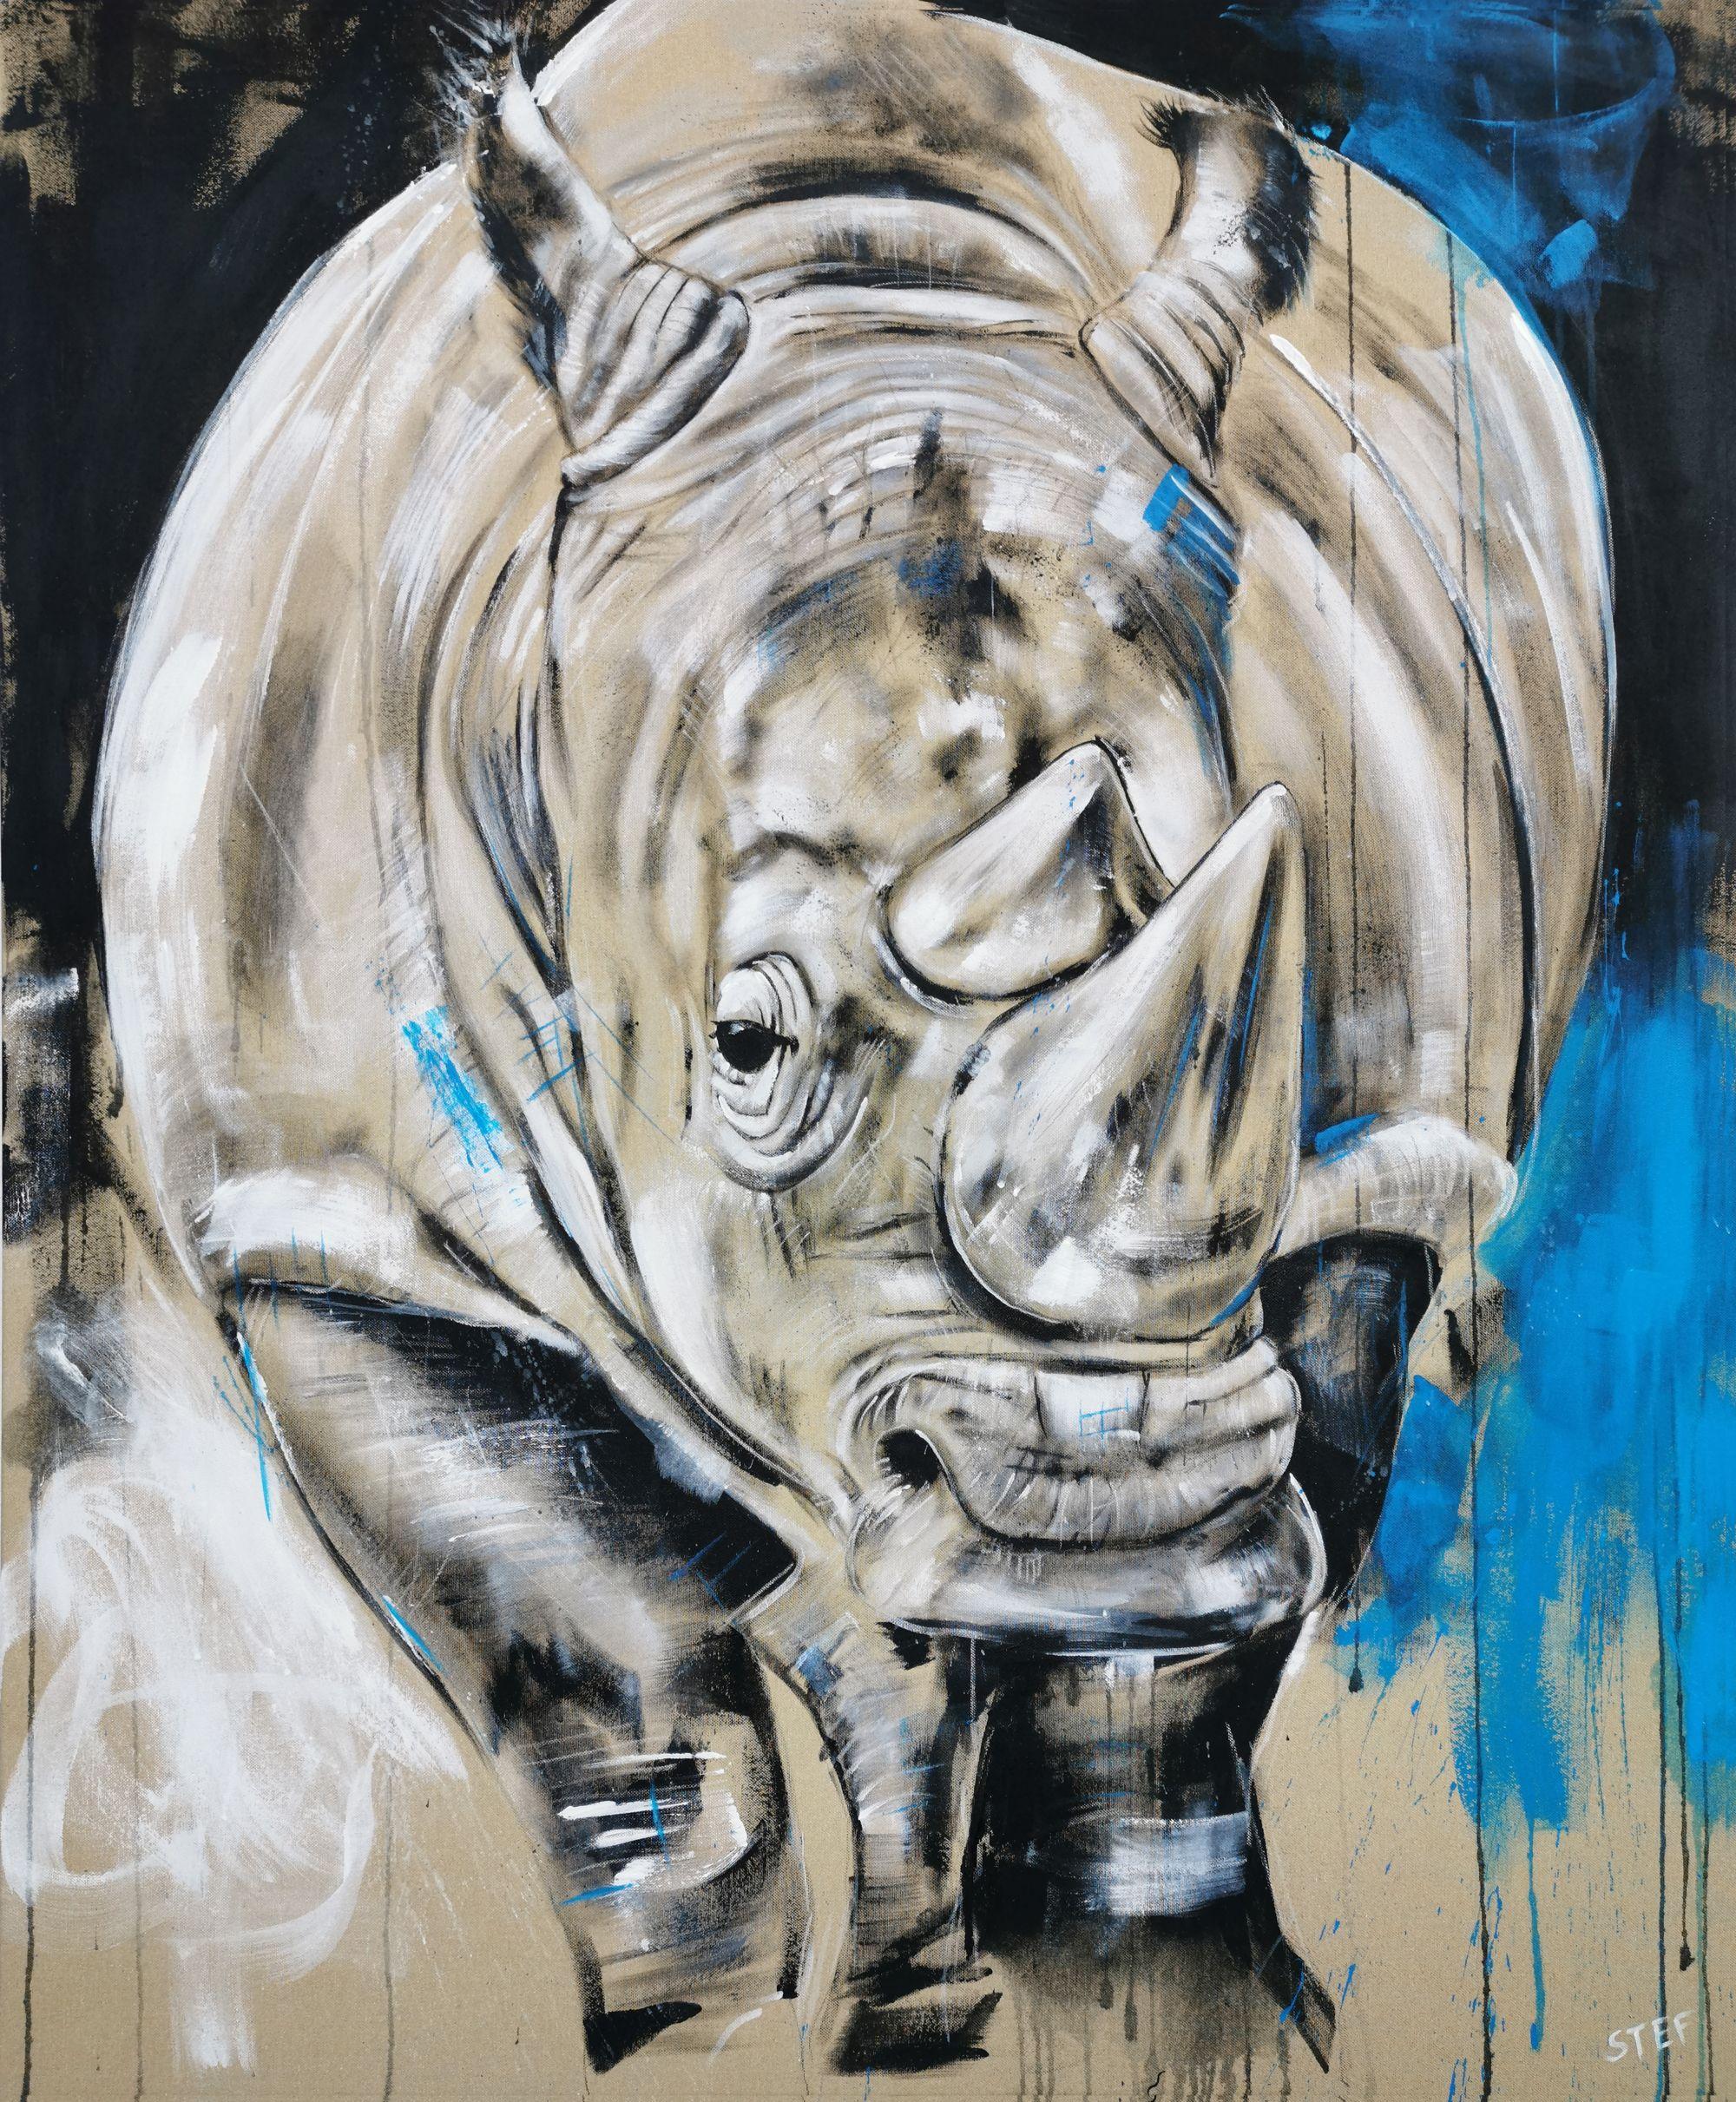 RHINO #4 is an expressive painting of a close up rhino head.    Splashing Colors in black, white and blue on raw canvas.  The monochrome color in combination with the soft tone of the canvas:    100 x 120 cm    â€žNo one in the world needs a rhino